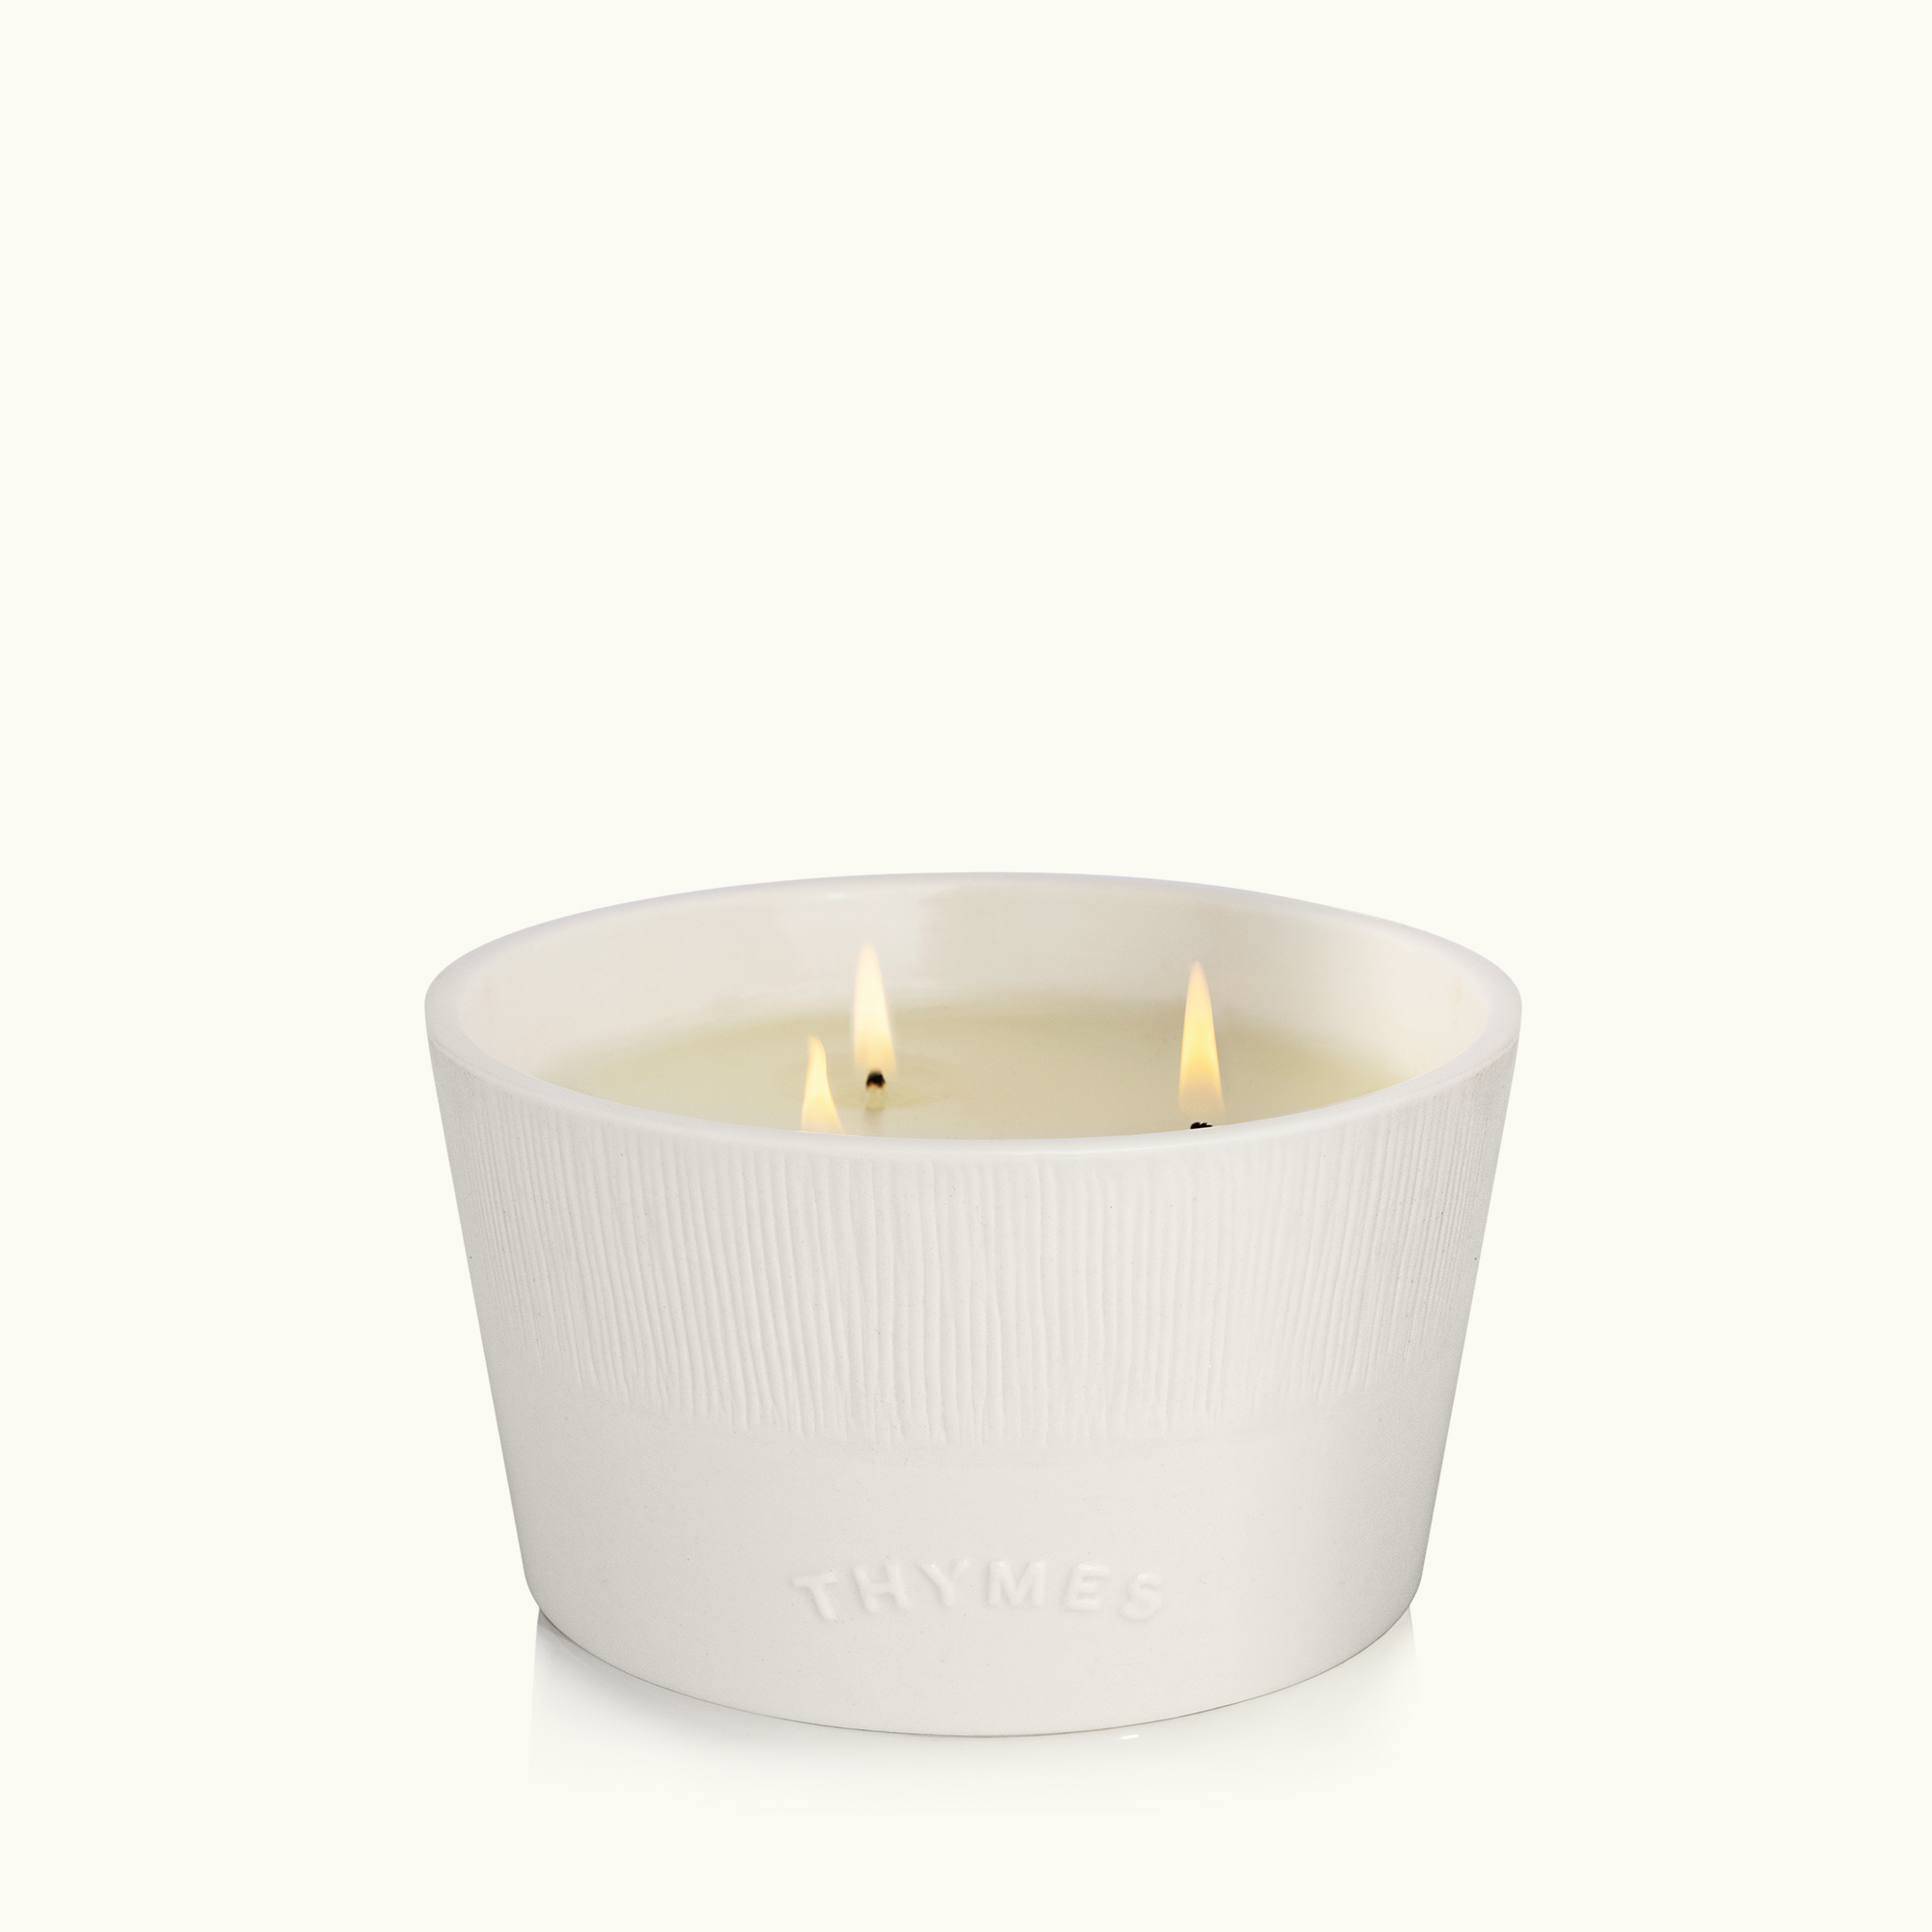  Thymes 3 Wick Candle - Sienna Sage Scented Candle for a Warm  Home Fragrance - White Candles Accented with a Gold Candle Lid - Textured Ceramic  Candle Jar (13.5 oz) : Health & Household